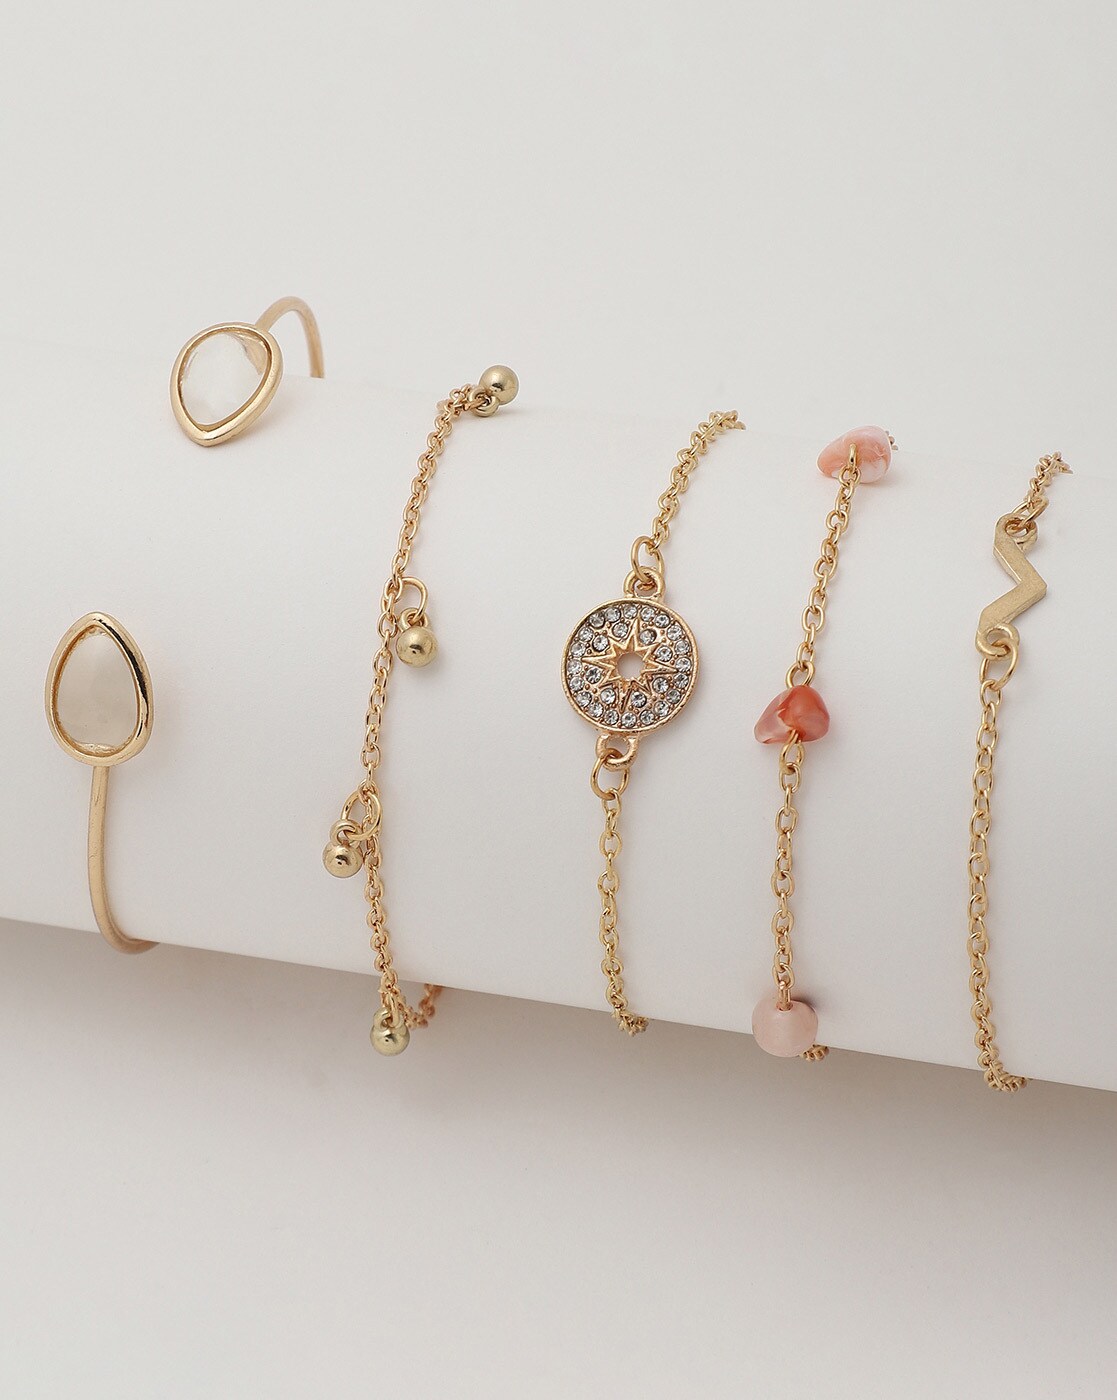 Pandora - Pandora Pro Tip: Give your bracelets a theme! This customer  focused on rose gold-plated pieces and heart charms to create a custom bracelet  set all about love. Start your bracelet